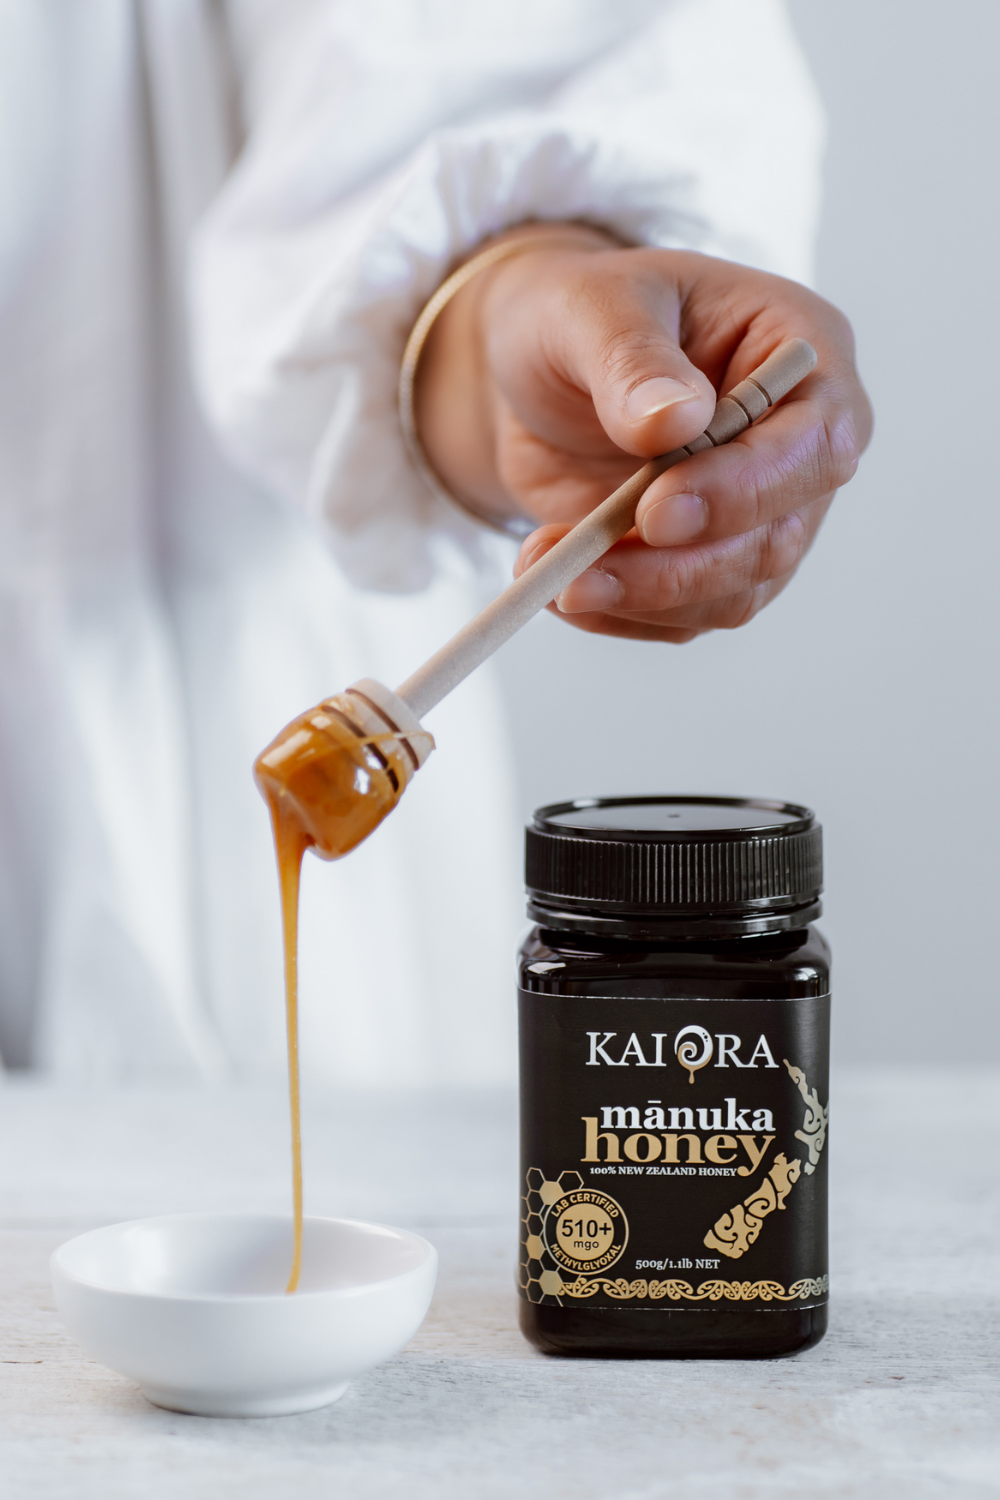 Everything you should know about Mānuka honey and what makes Mānuka honey so good.